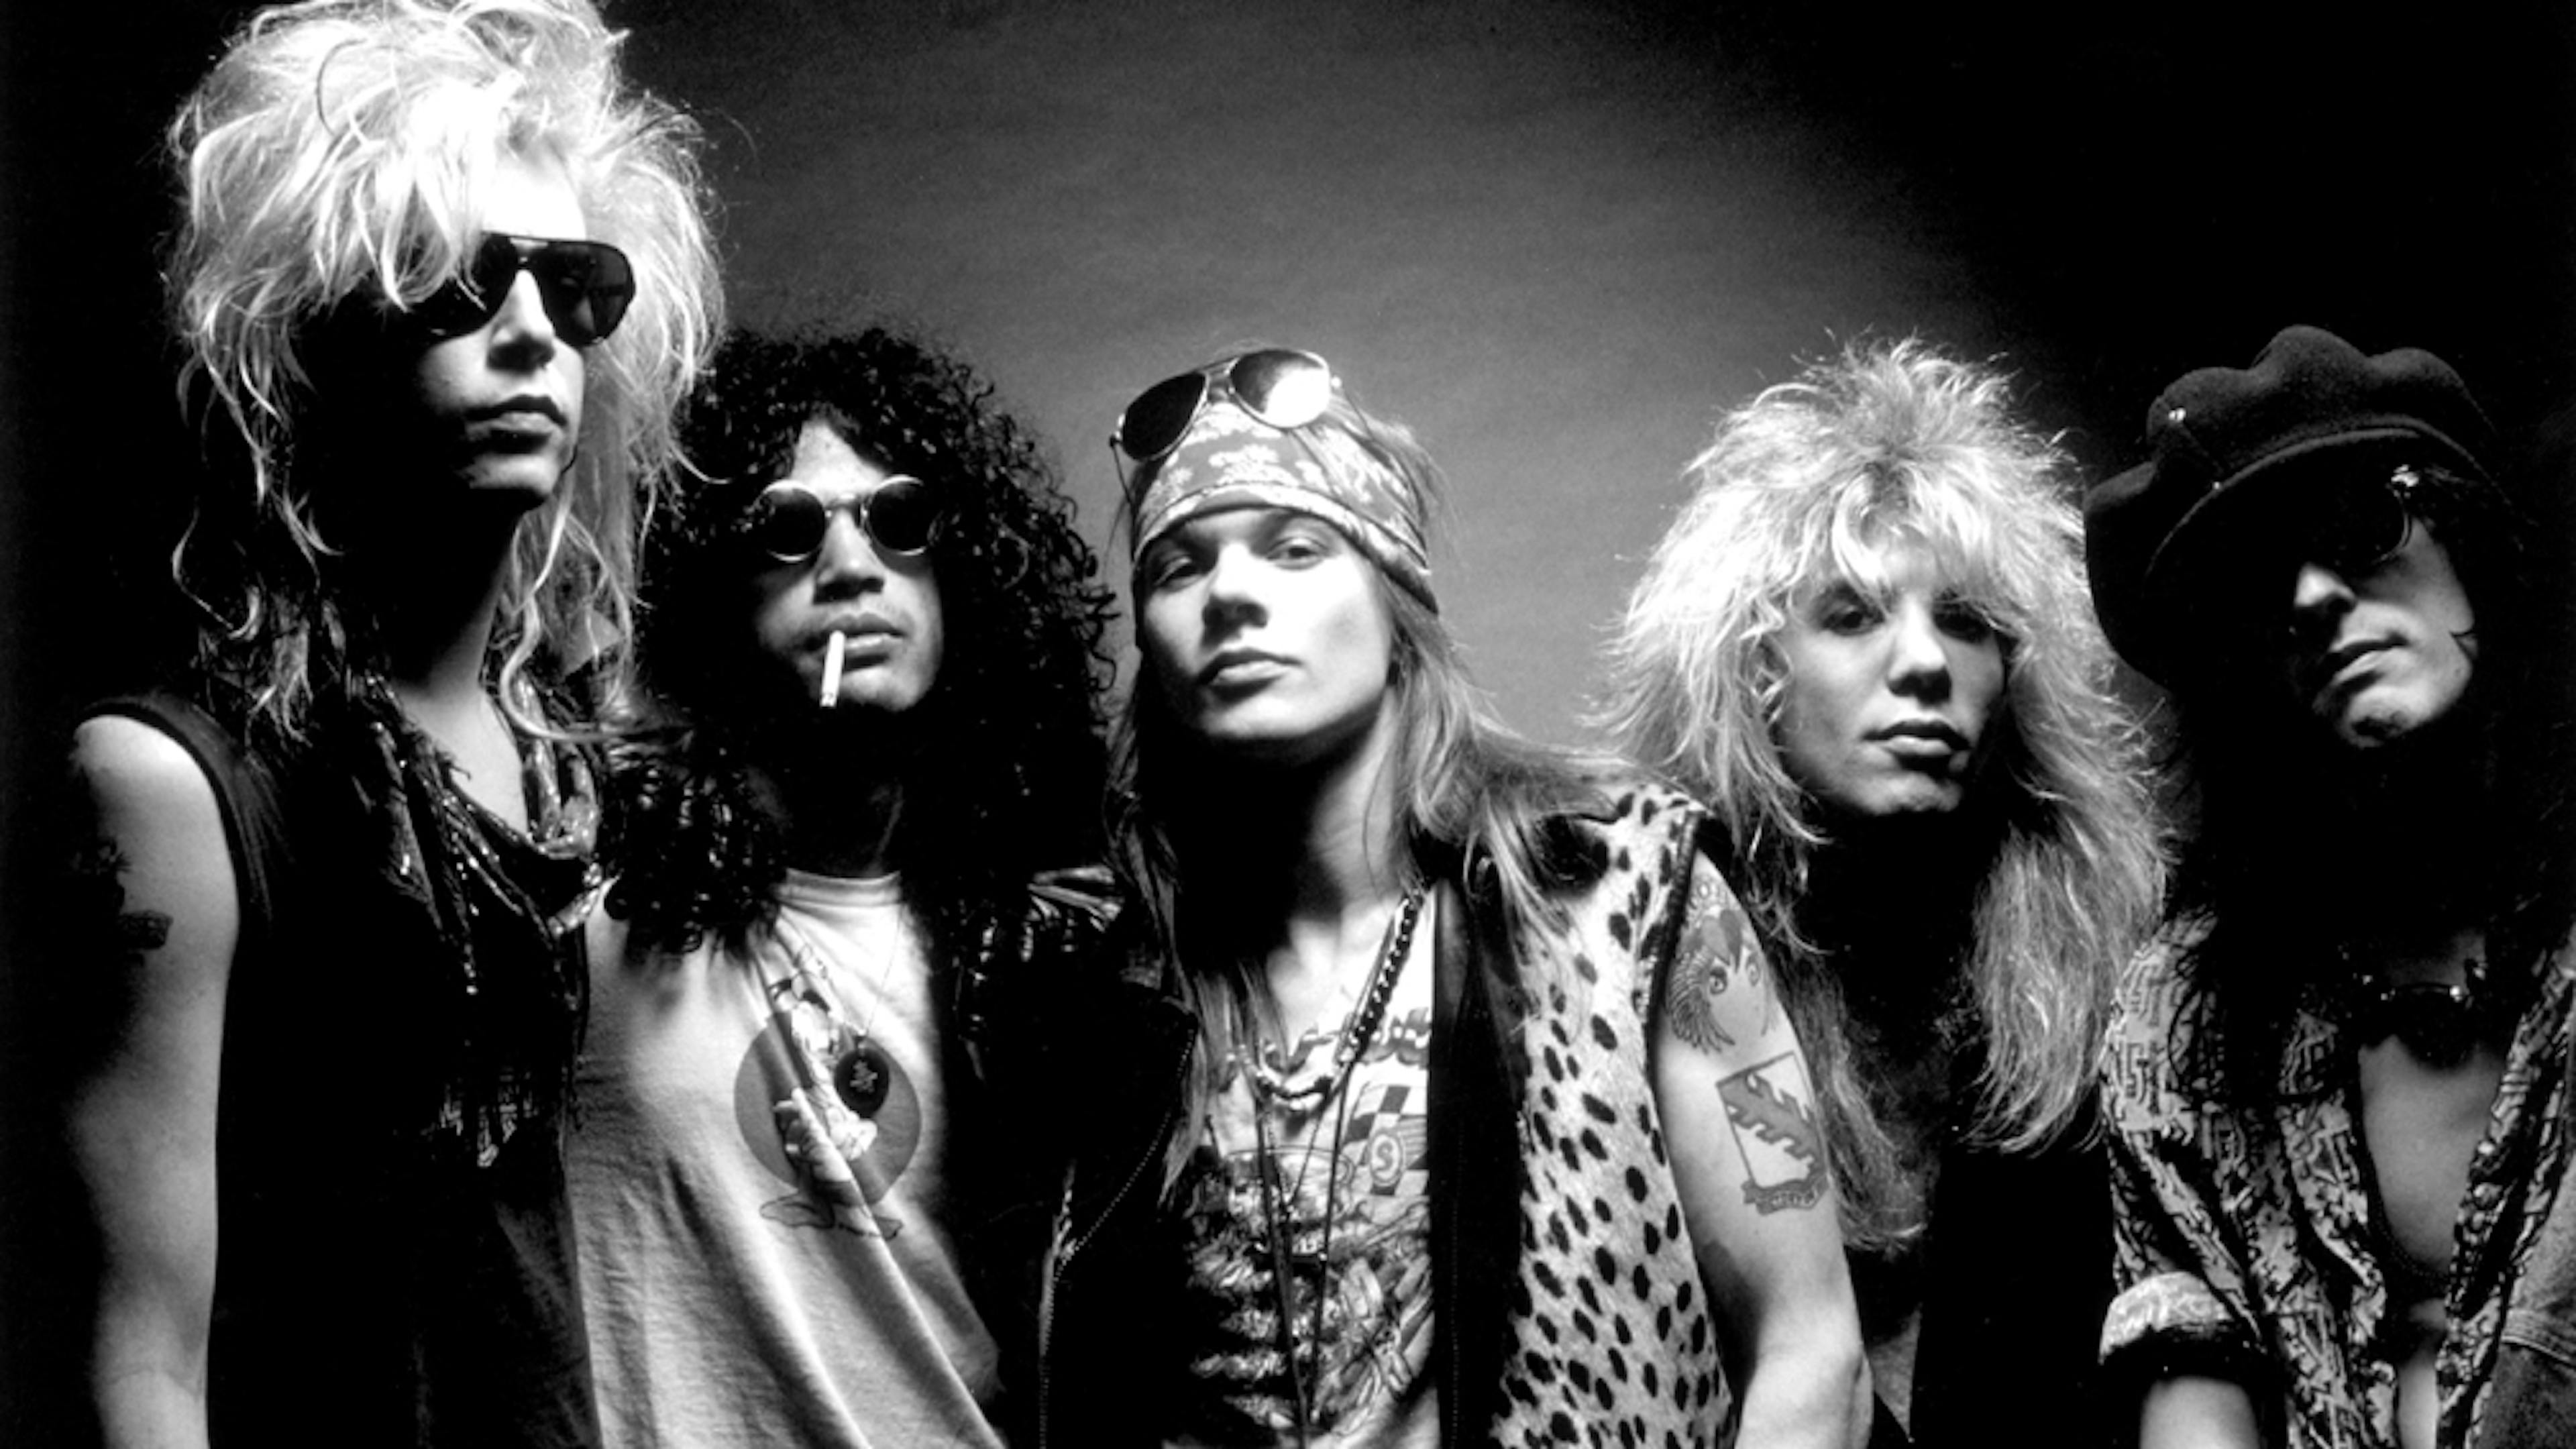 Guns N' Roses Add Another UK Date To 2020 Tour – Tickets On Sale Now